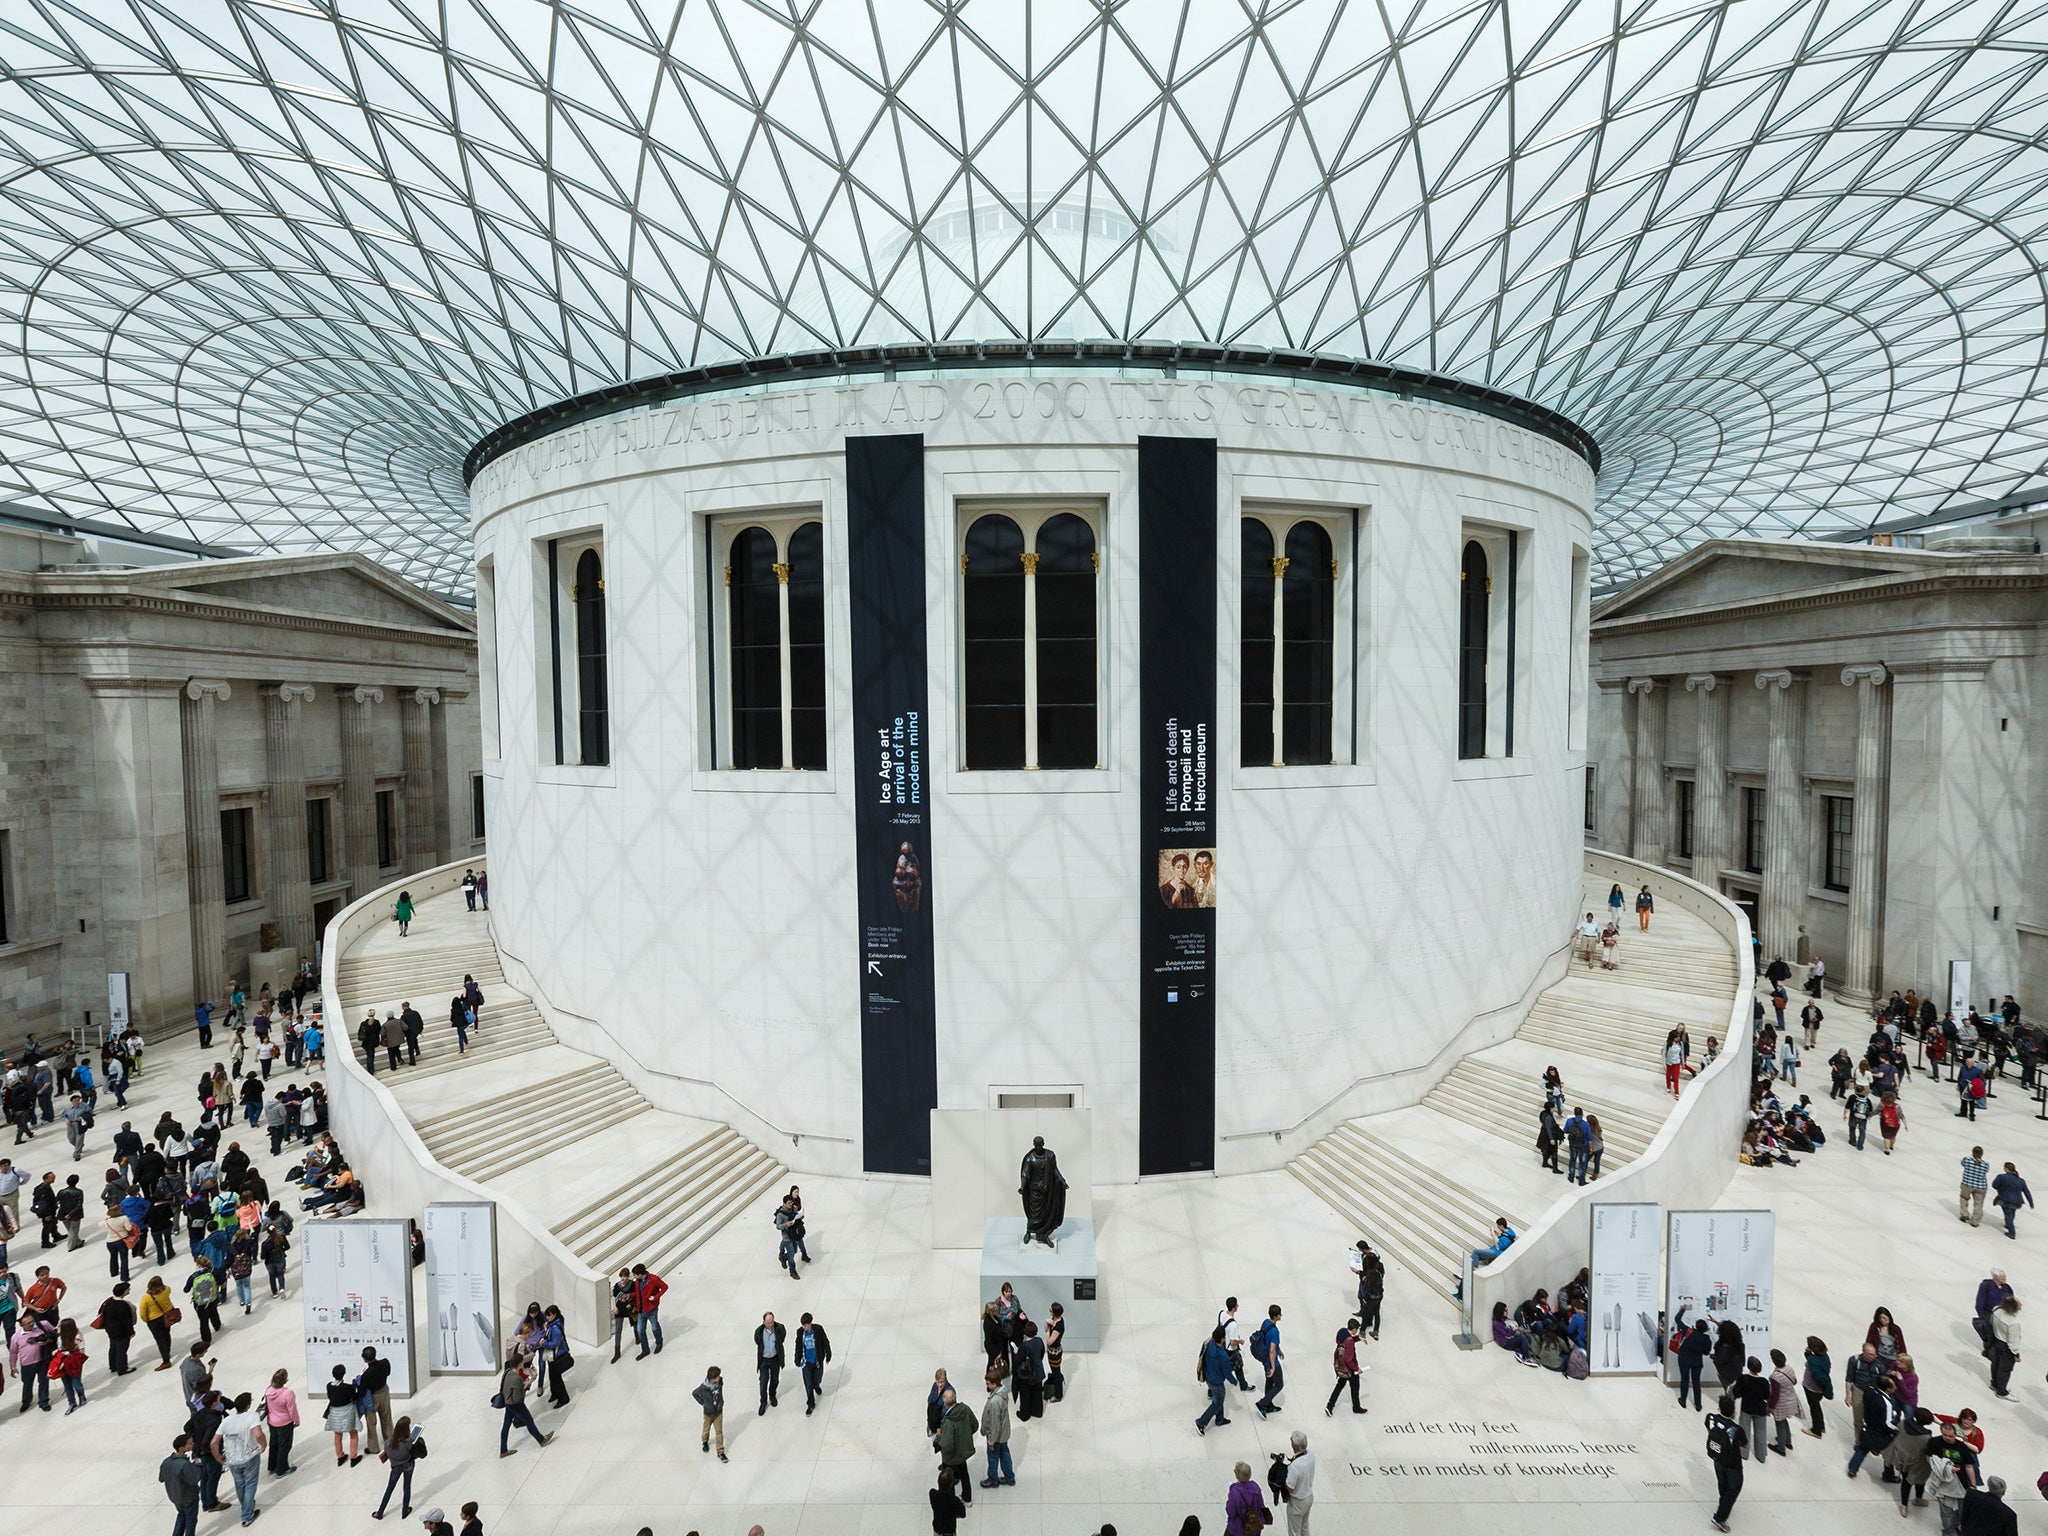 The Great Court in the British Museum